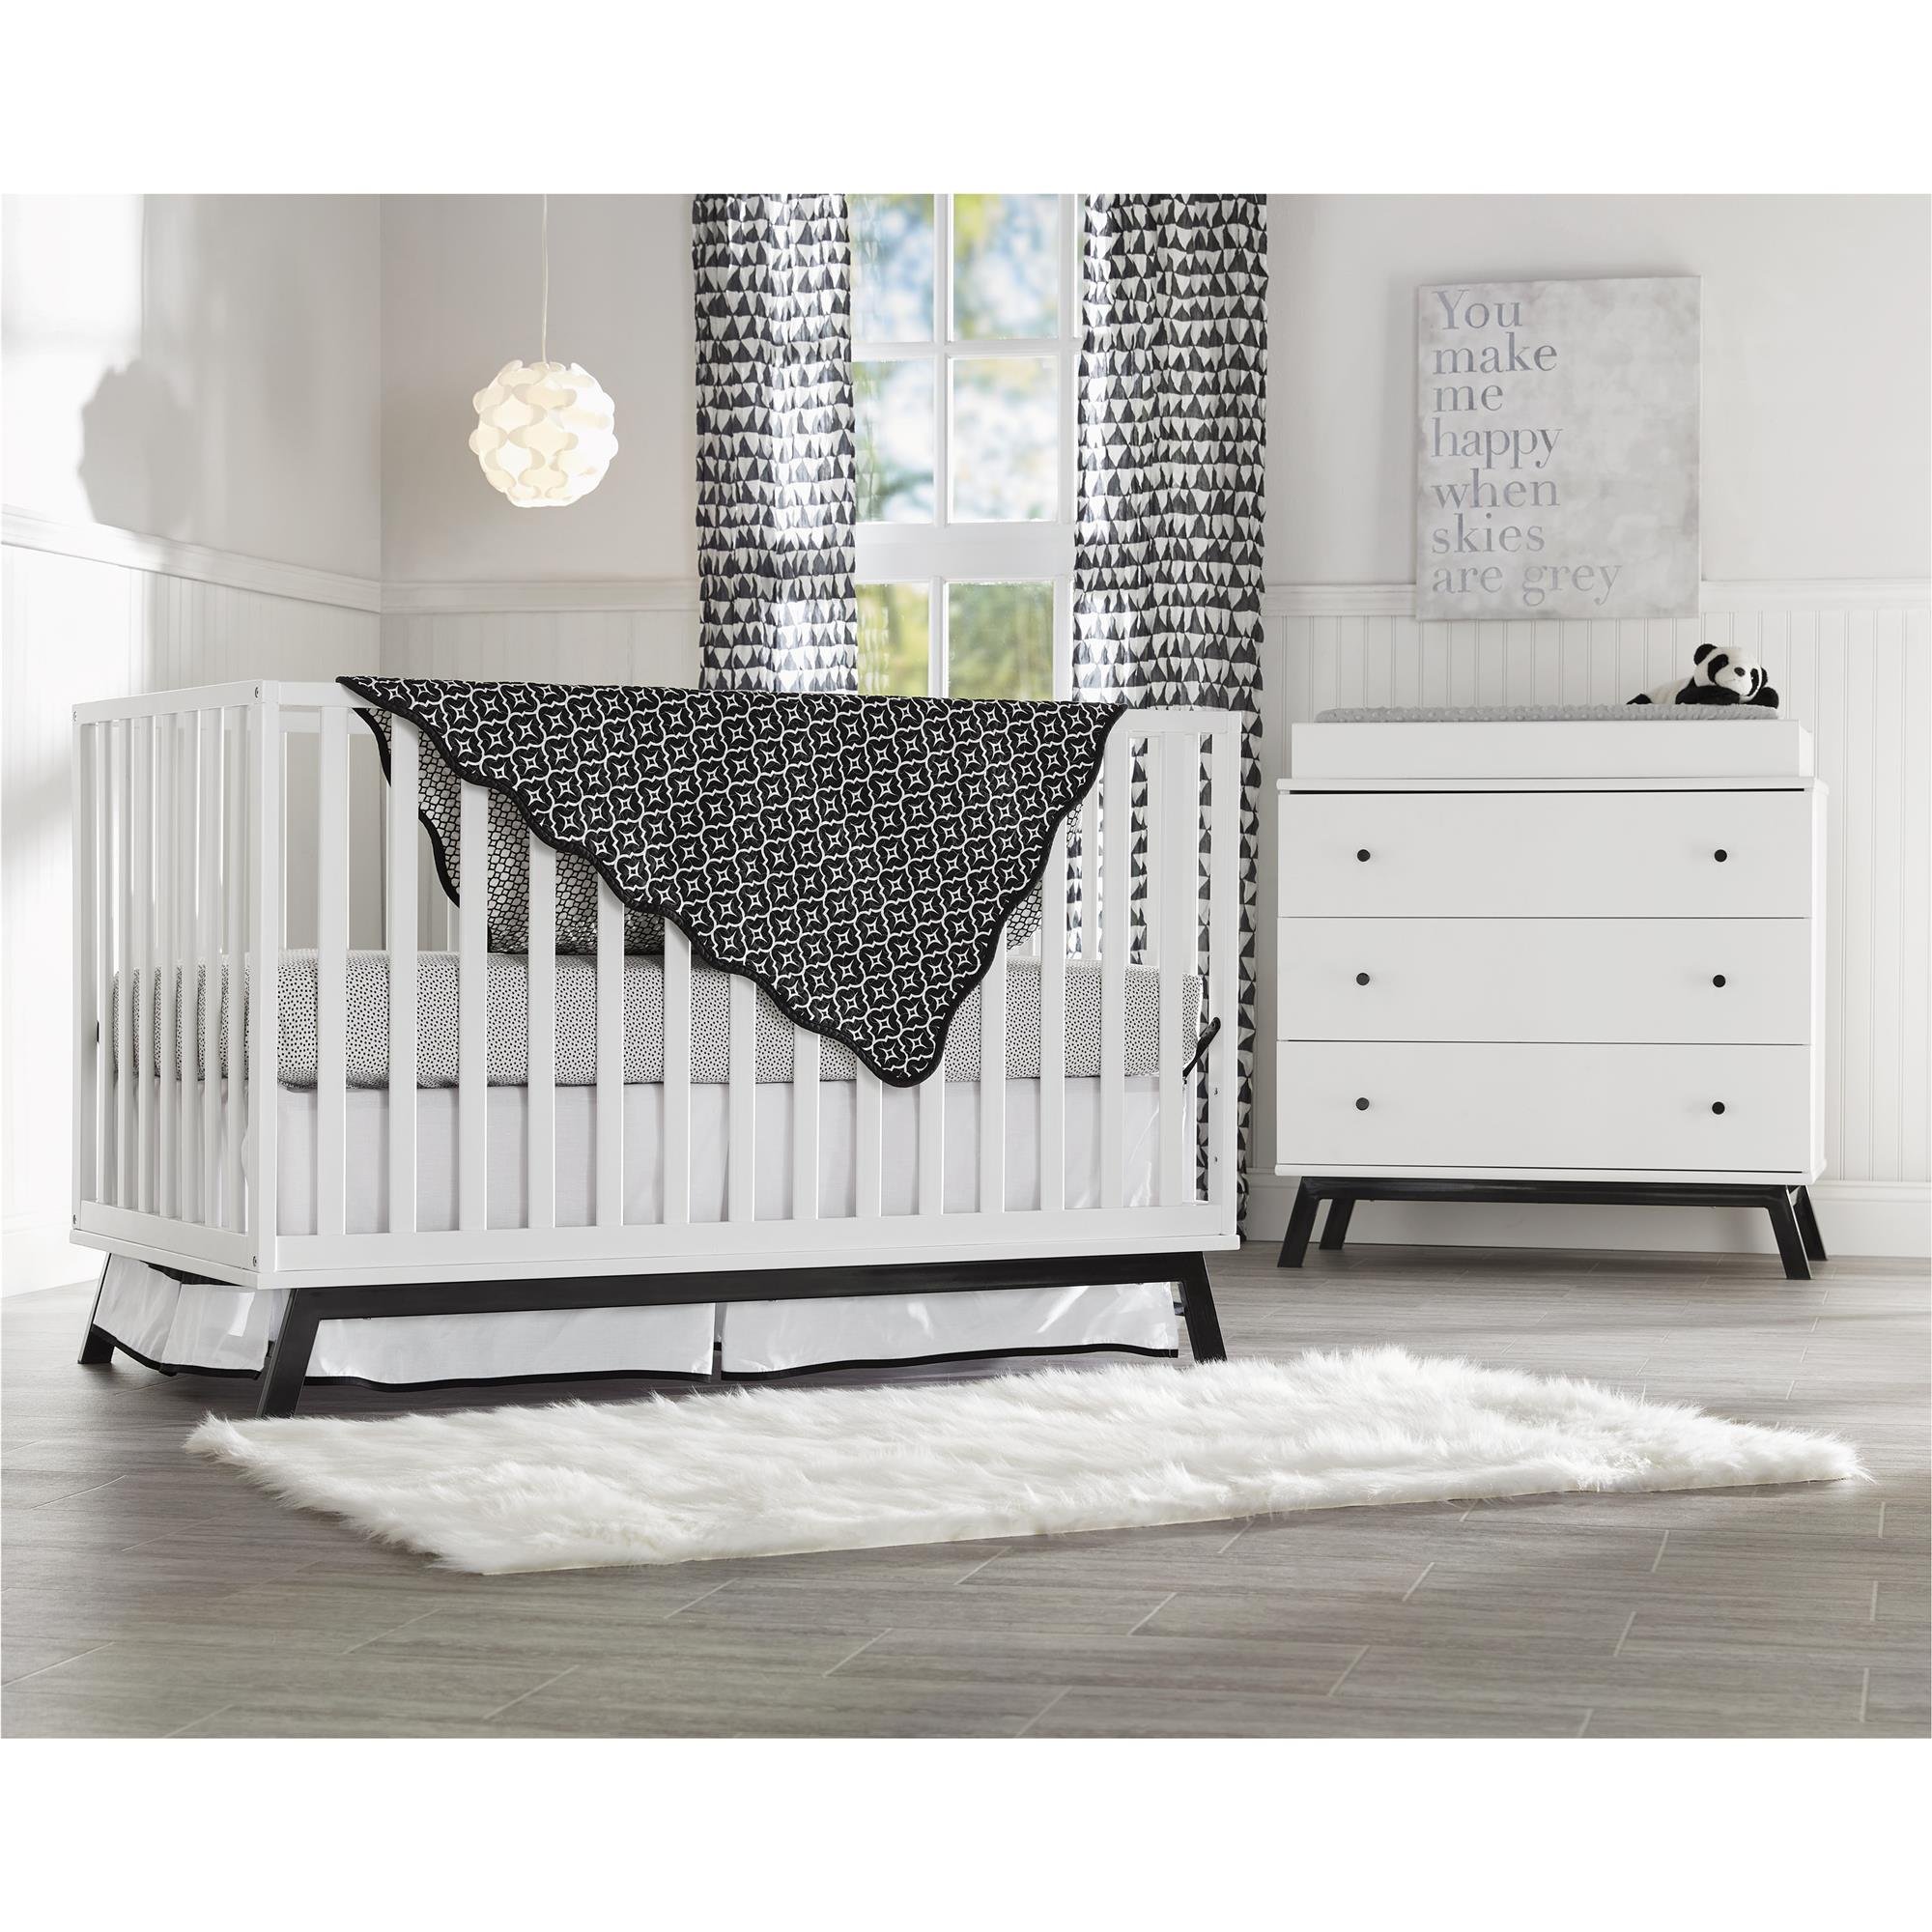 Little Seeds Changing Table Topper, White